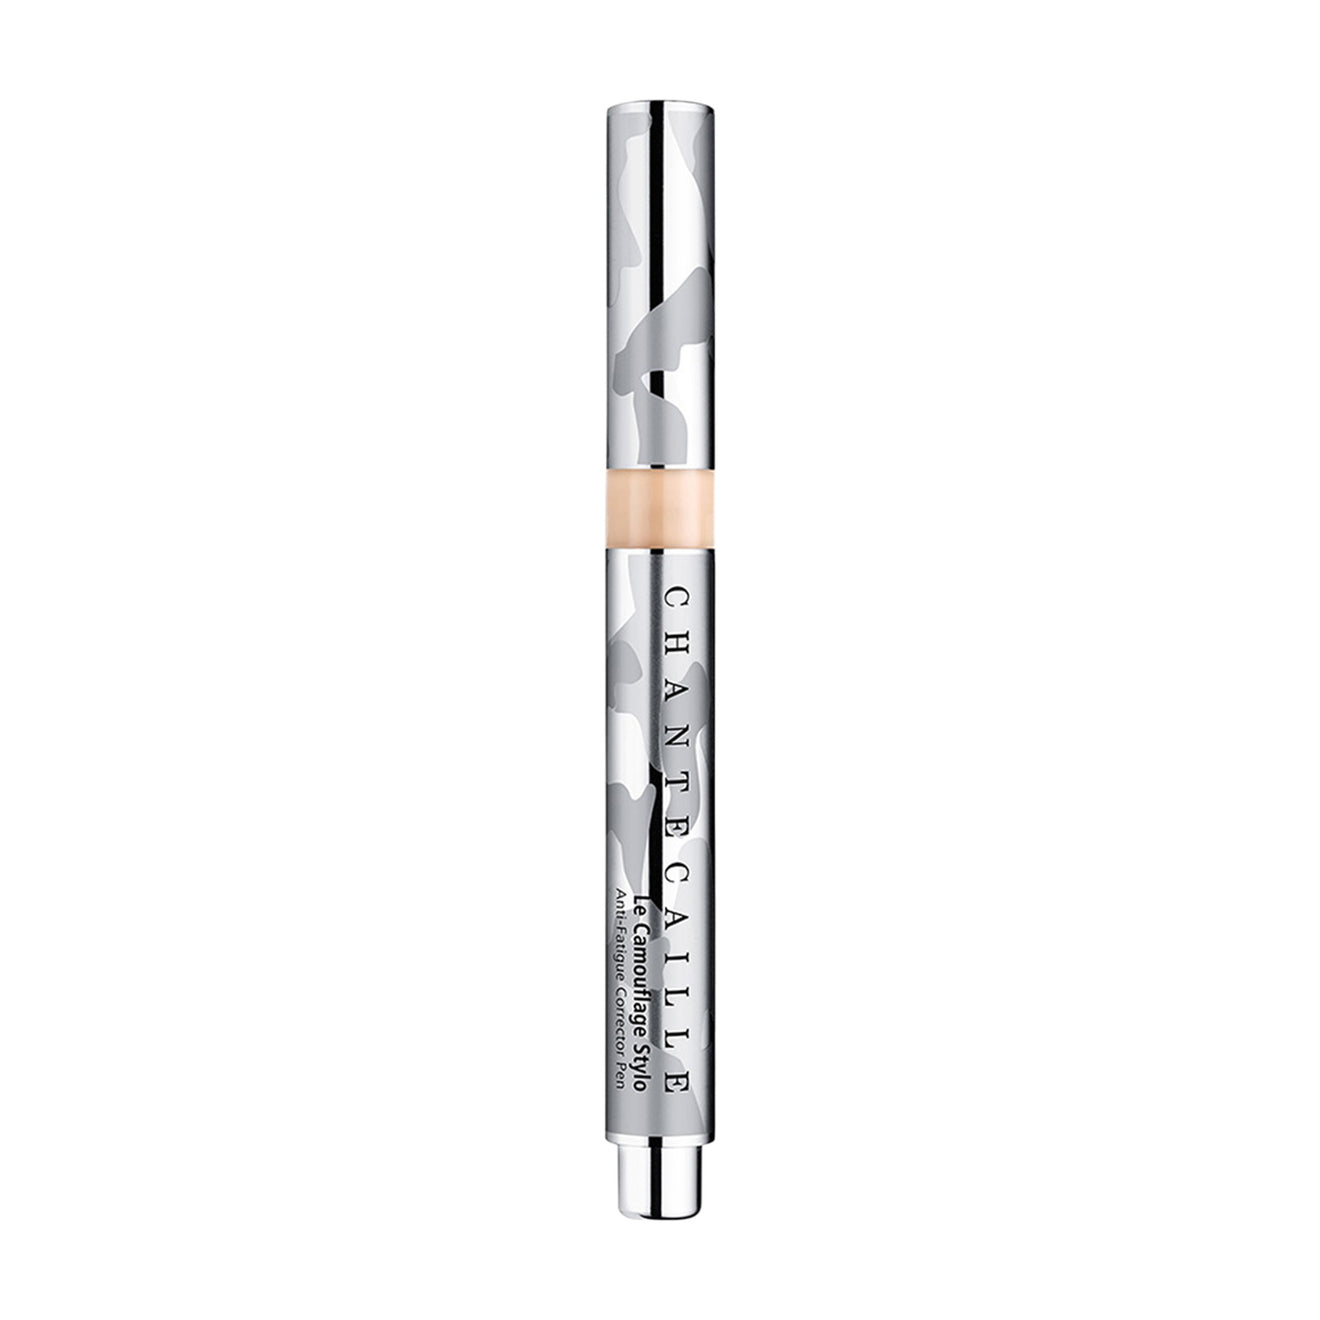 Chantecaille Le Camouflage Stylo Concealer Color/Shade variant: Stylo 2 main image. This product is for light neutral pink complexions